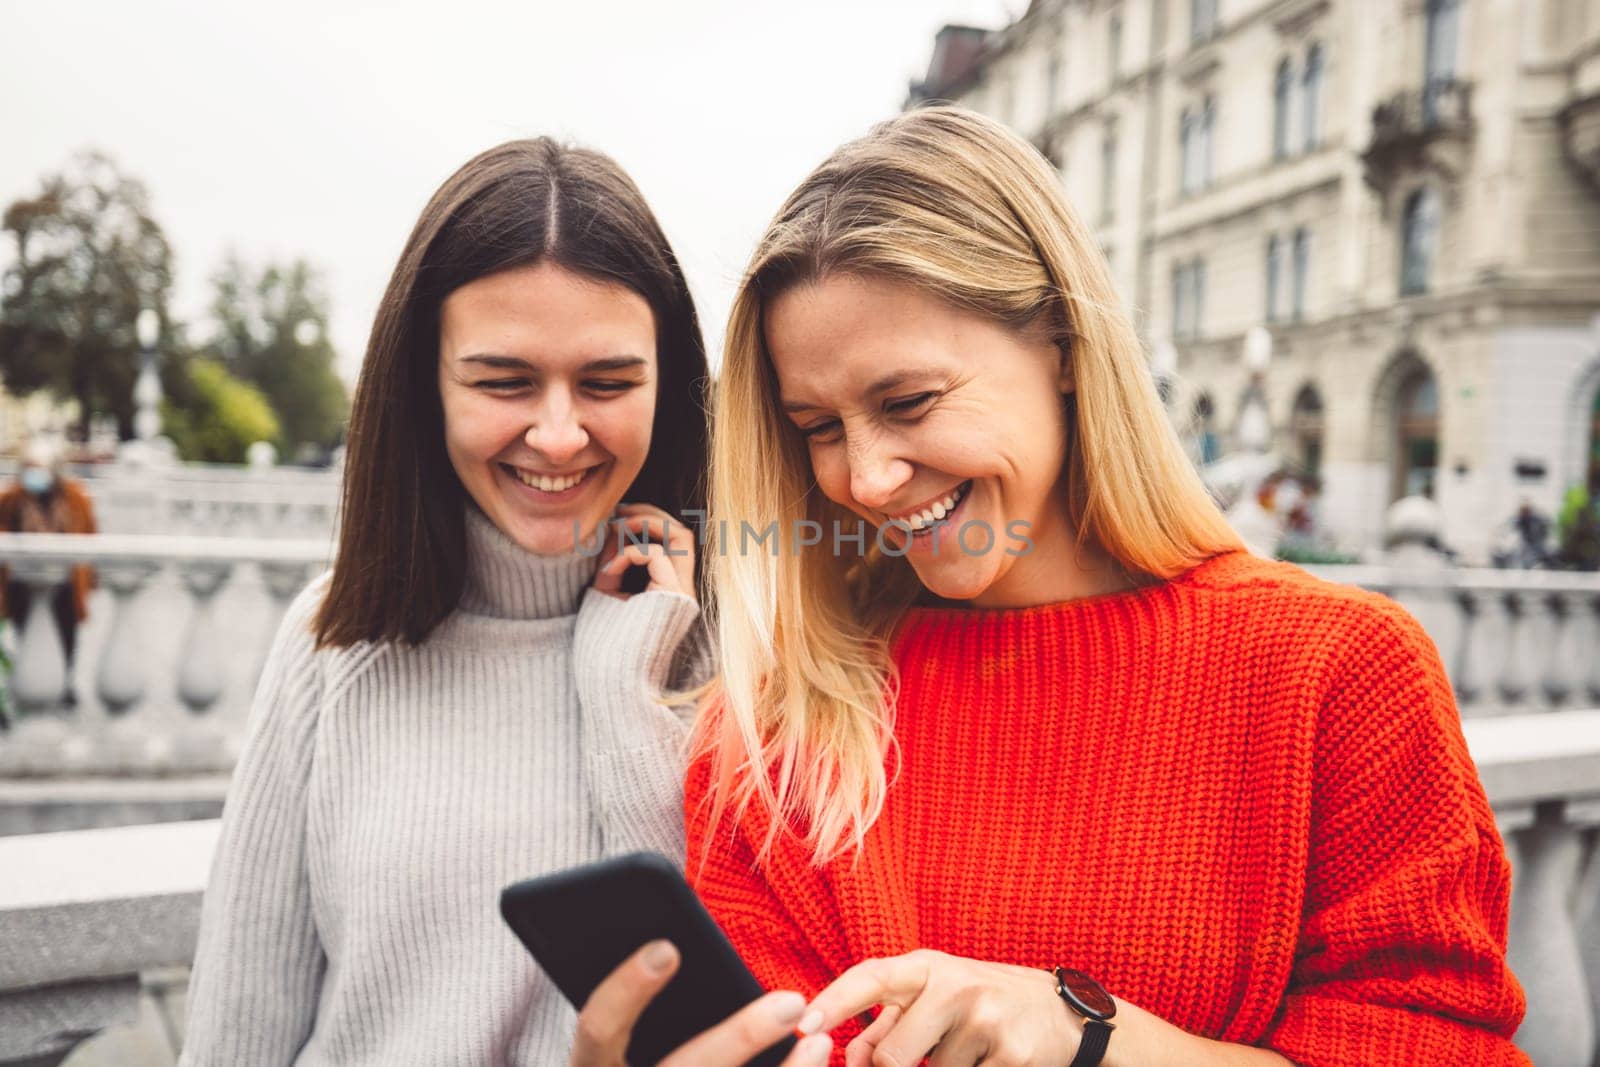 Waist up portrait two smiling young women in red and beige sweater walking around the city looking down at their phone by VisualProductions